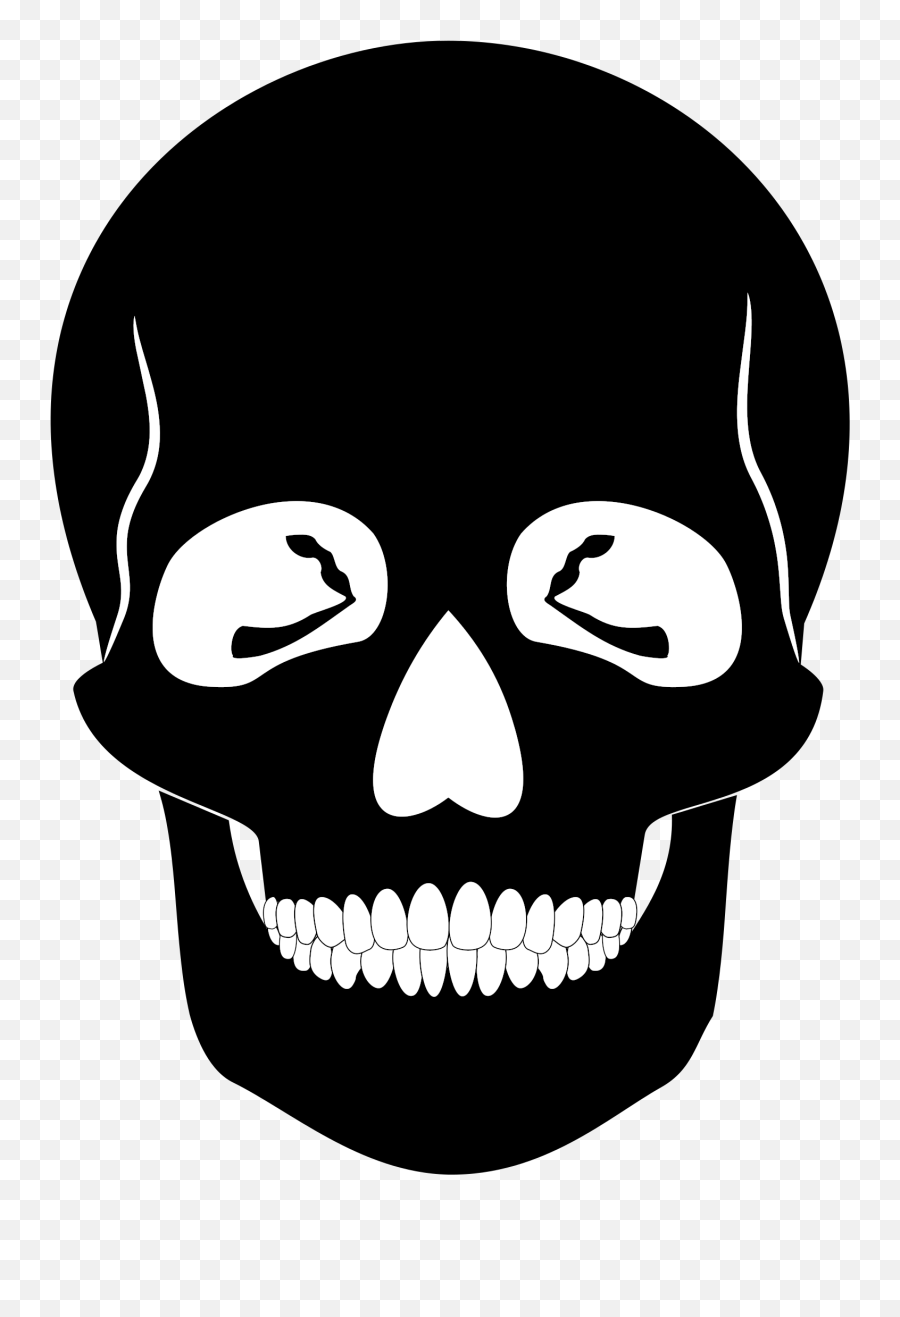 Head Silhouette Skull Png Clipart - Skull Silhouette Png,Skull Head Png